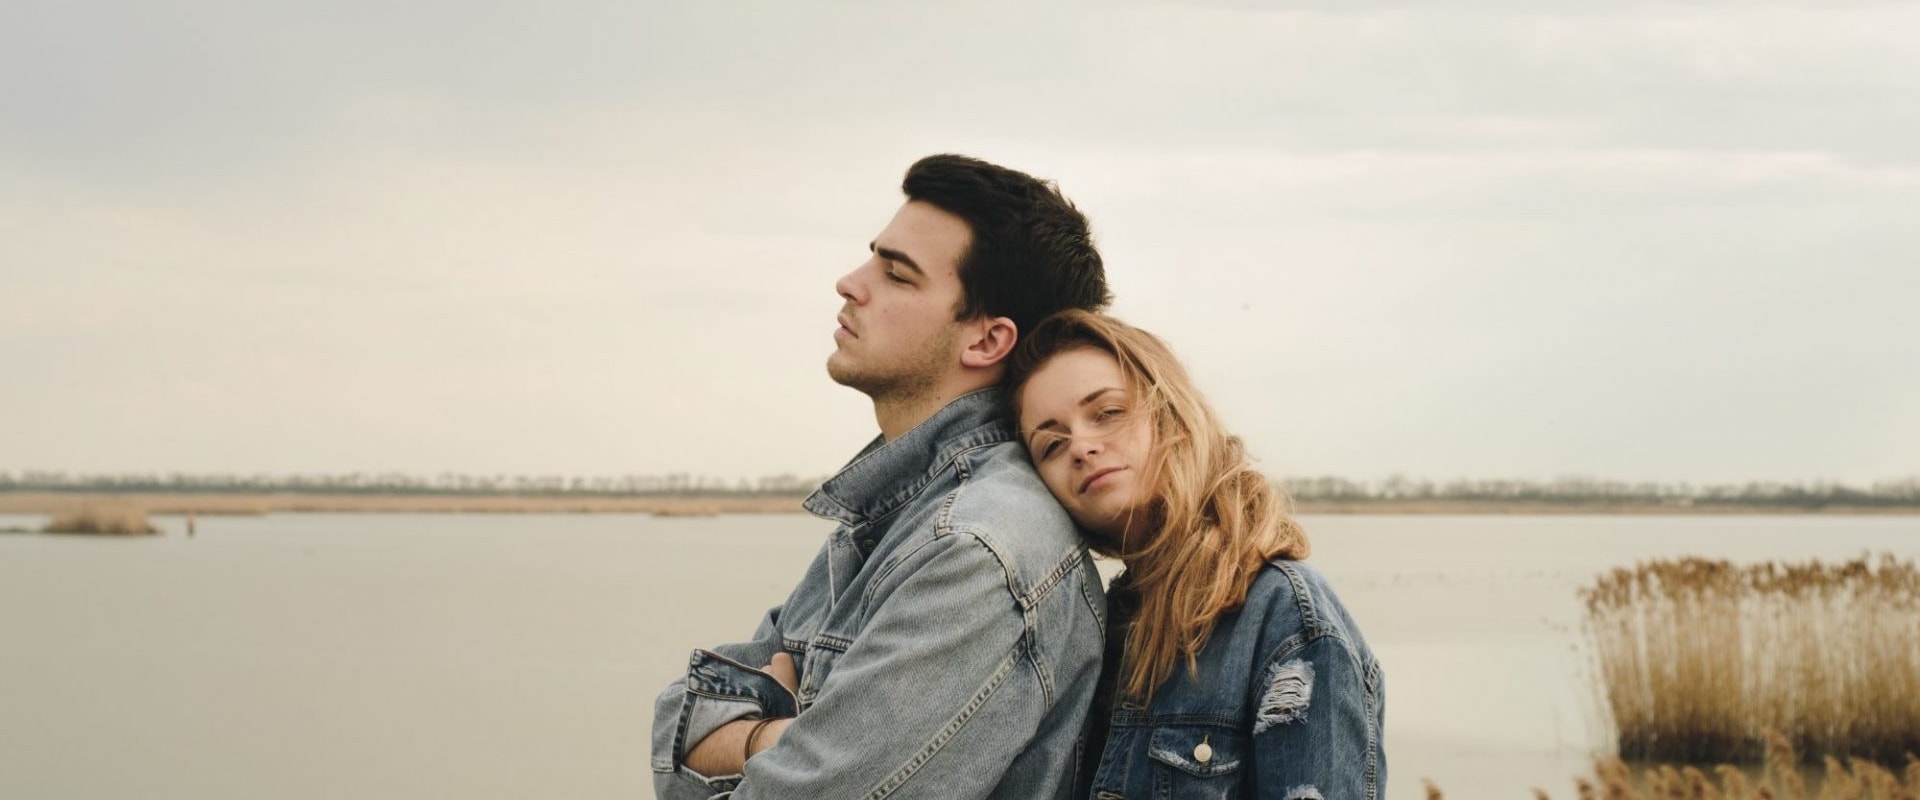 When should i start dating in recovery?